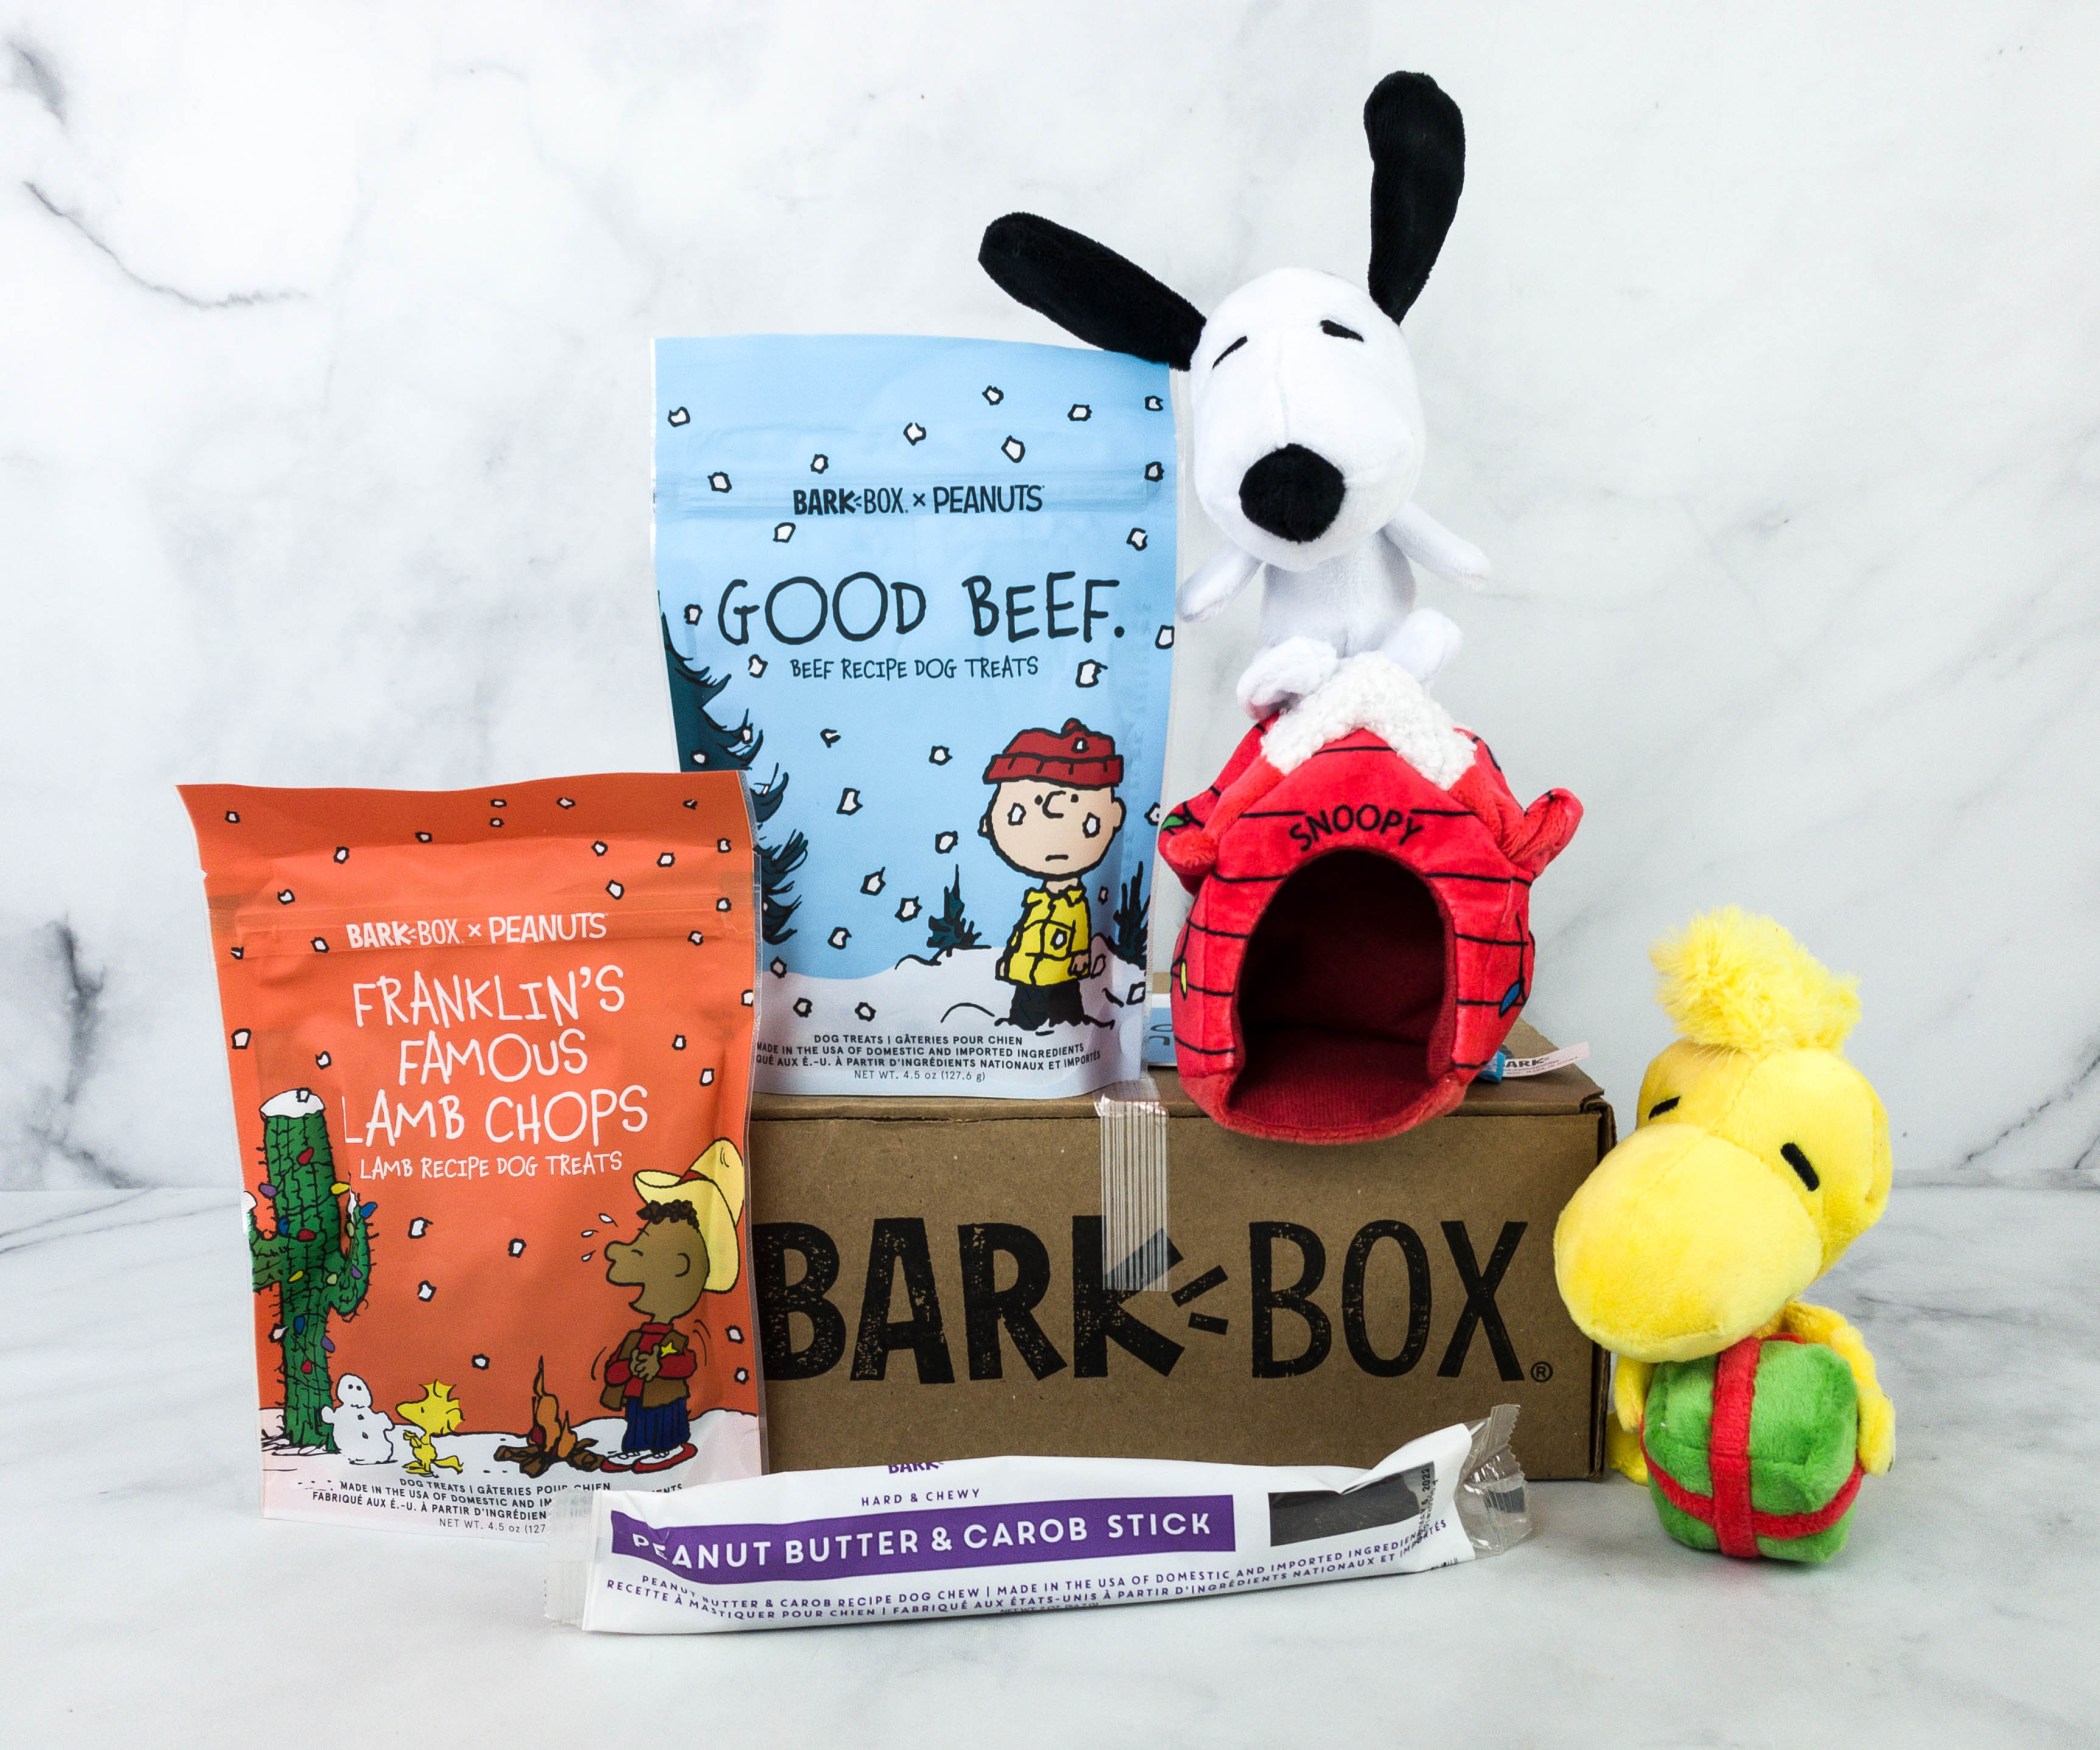 Barkbox Reviews Get All The Details At Hello Subscription!